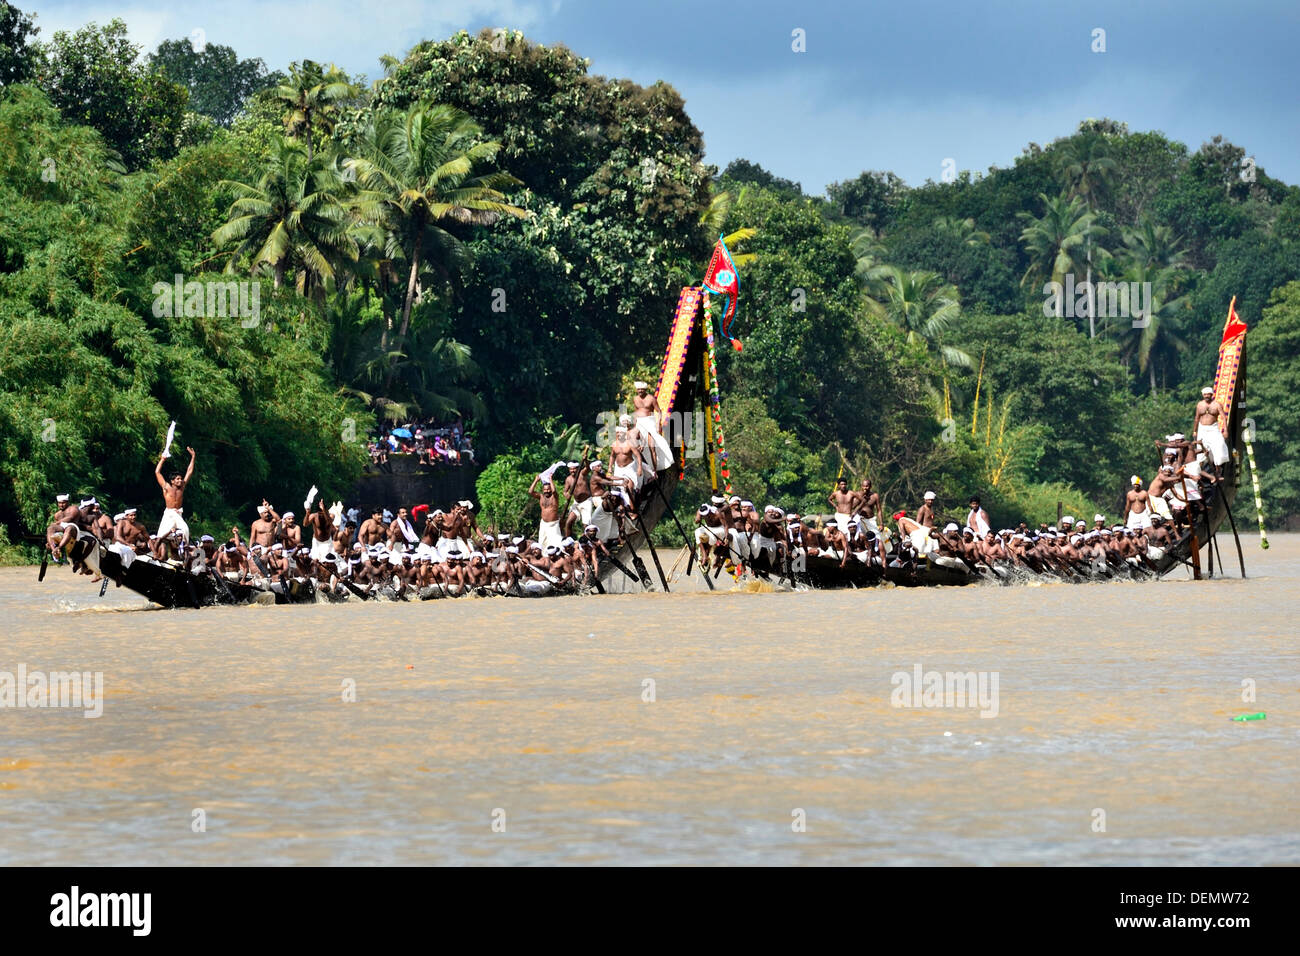 The Aranmula Boat Race the oldest river boat fiesta in Kerala, the south western State of India is held during Onam (August-September). It takes place at Aranmula, near a Hindu temple dedicated to Lord Krishna and Arjuna. The snake boats move in pairs to the rhythm of full-throated singing and shouting watched by an exciting crowd. Stock Photo